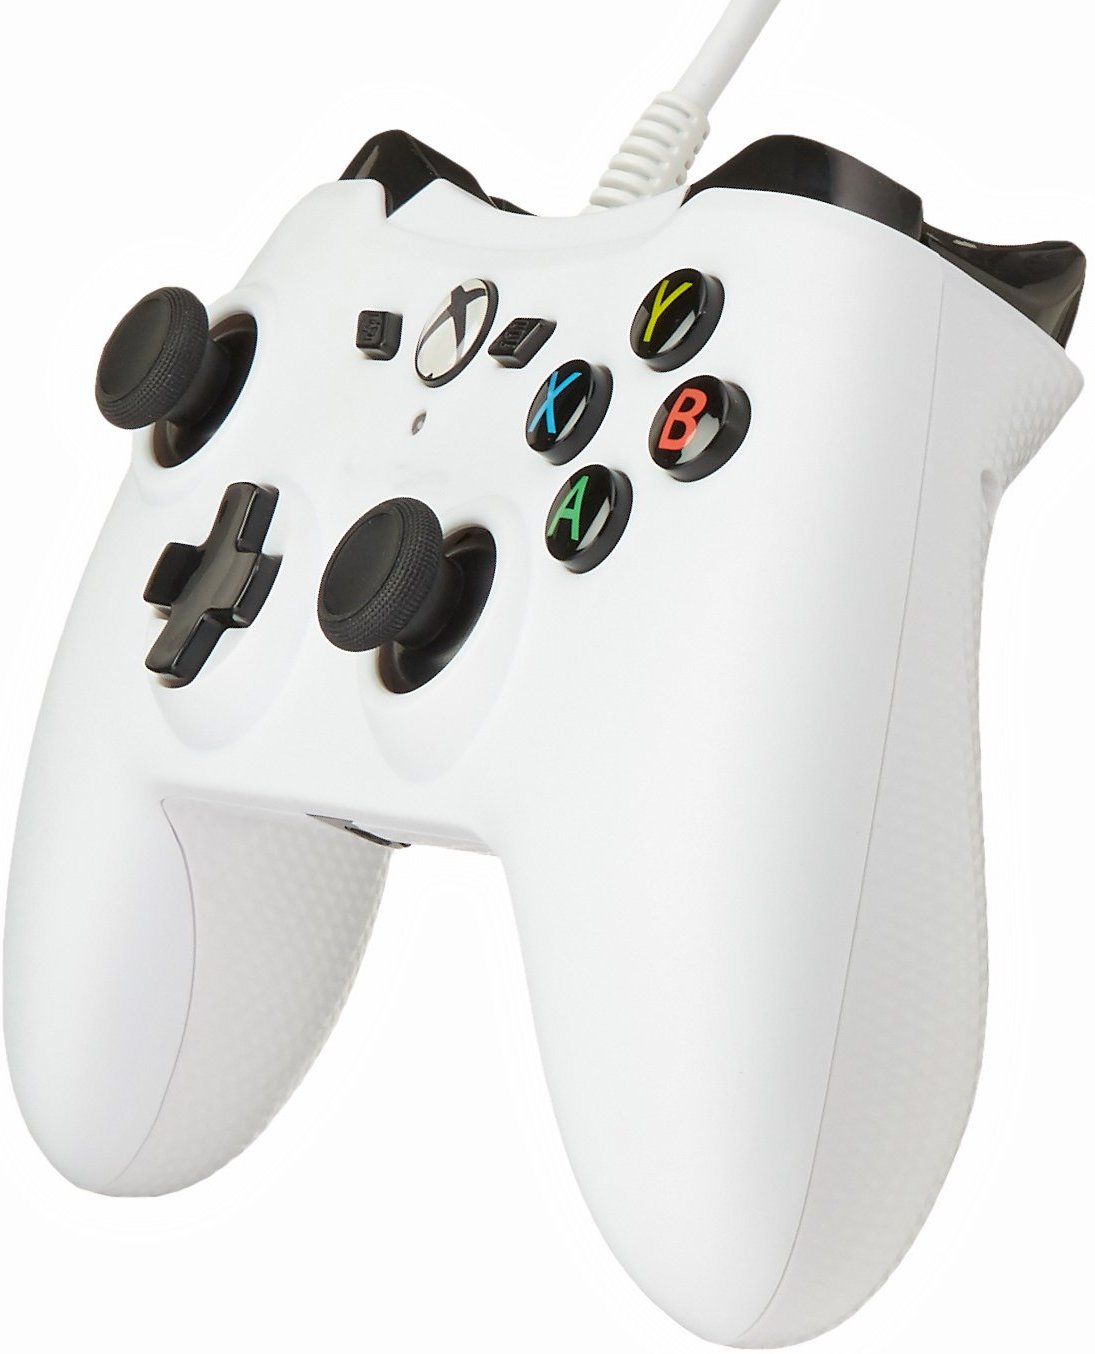 Amazon Basics Xbox One Wired Controller Driver